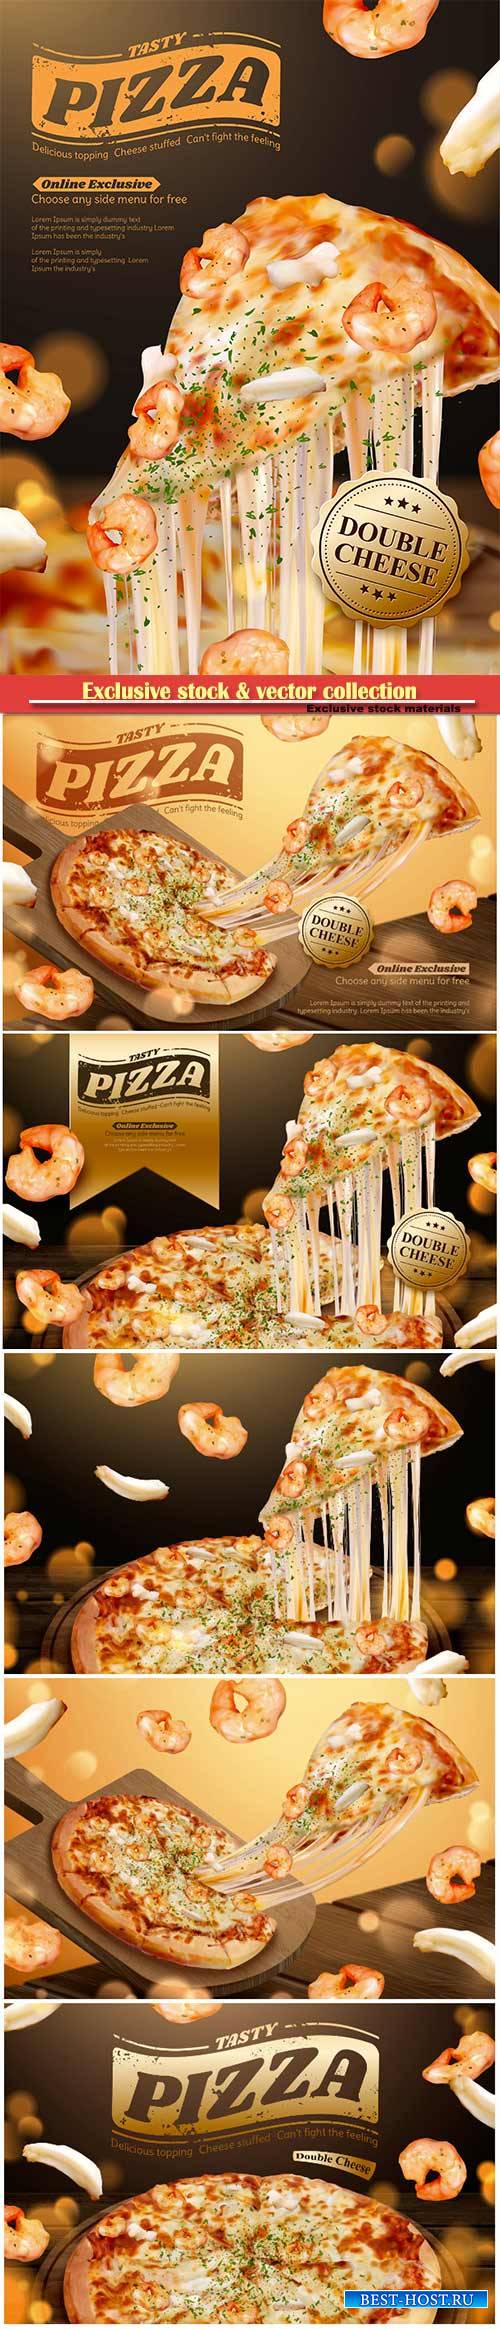 Tasty seafood pizza ads with stringy cheese in 3d illustration, shrimp and  ...